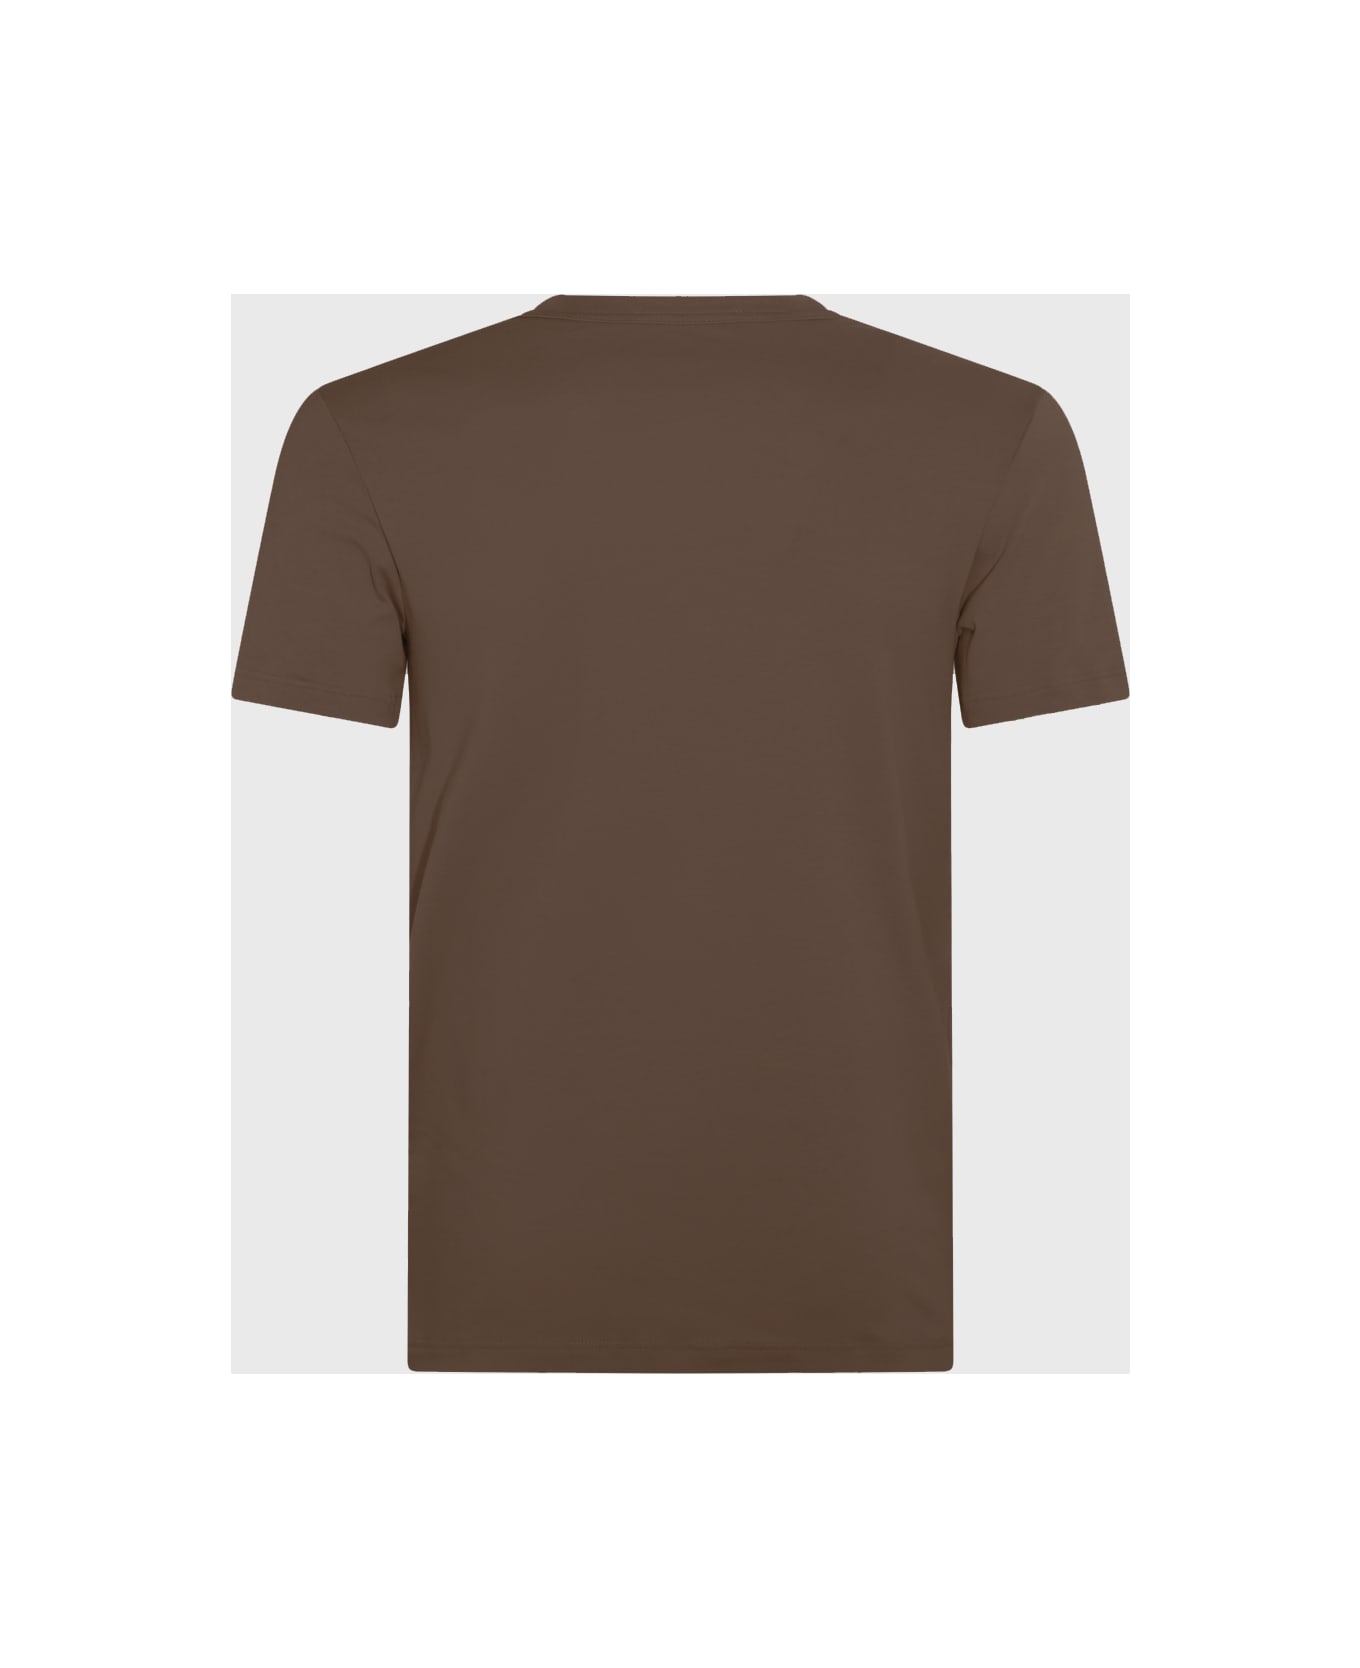 Tom Ford Nude Cotton T-shirt - NUDE 7 シャツ